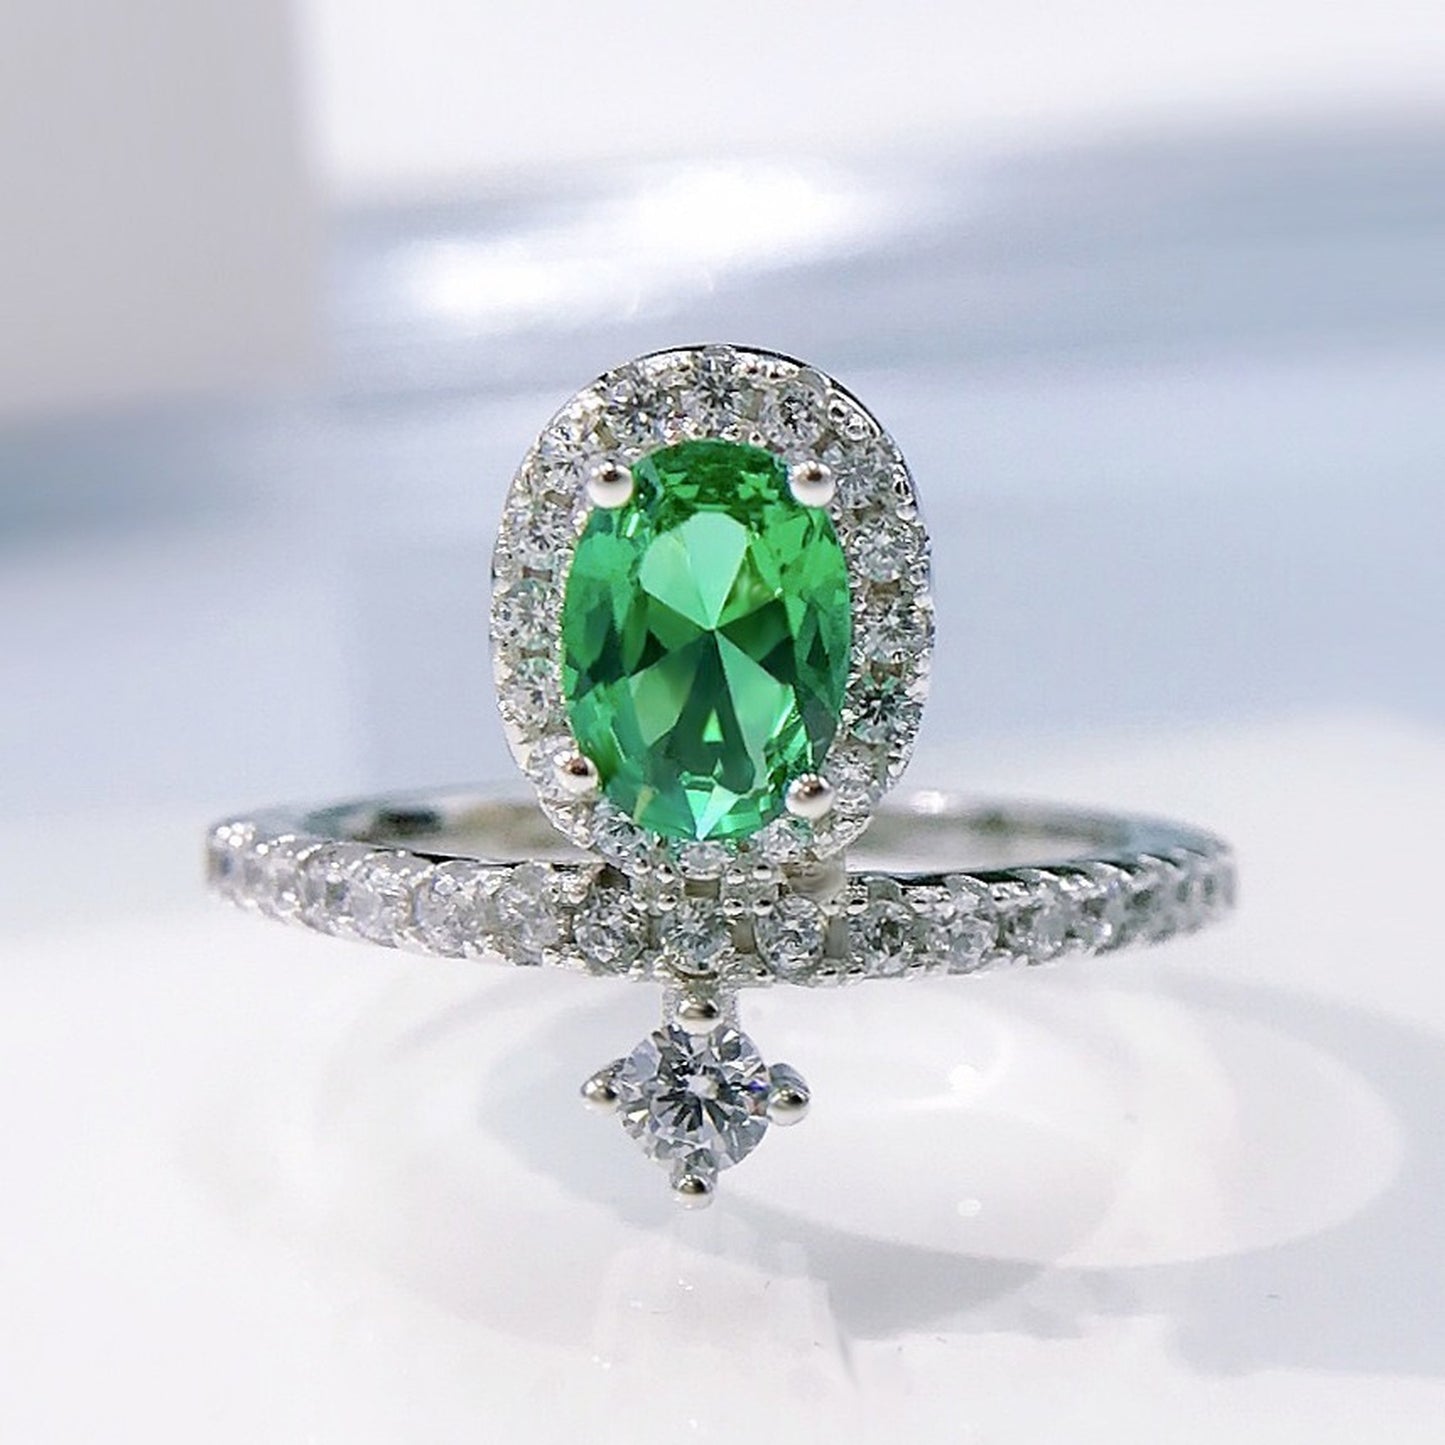 Vintage Emerald Engagement Wedding Ring, Oval Cut 1 Carat Emerald Ring, Green Emerald Ring, Emerald Diamond Bridal Ring, Anniversary Gift